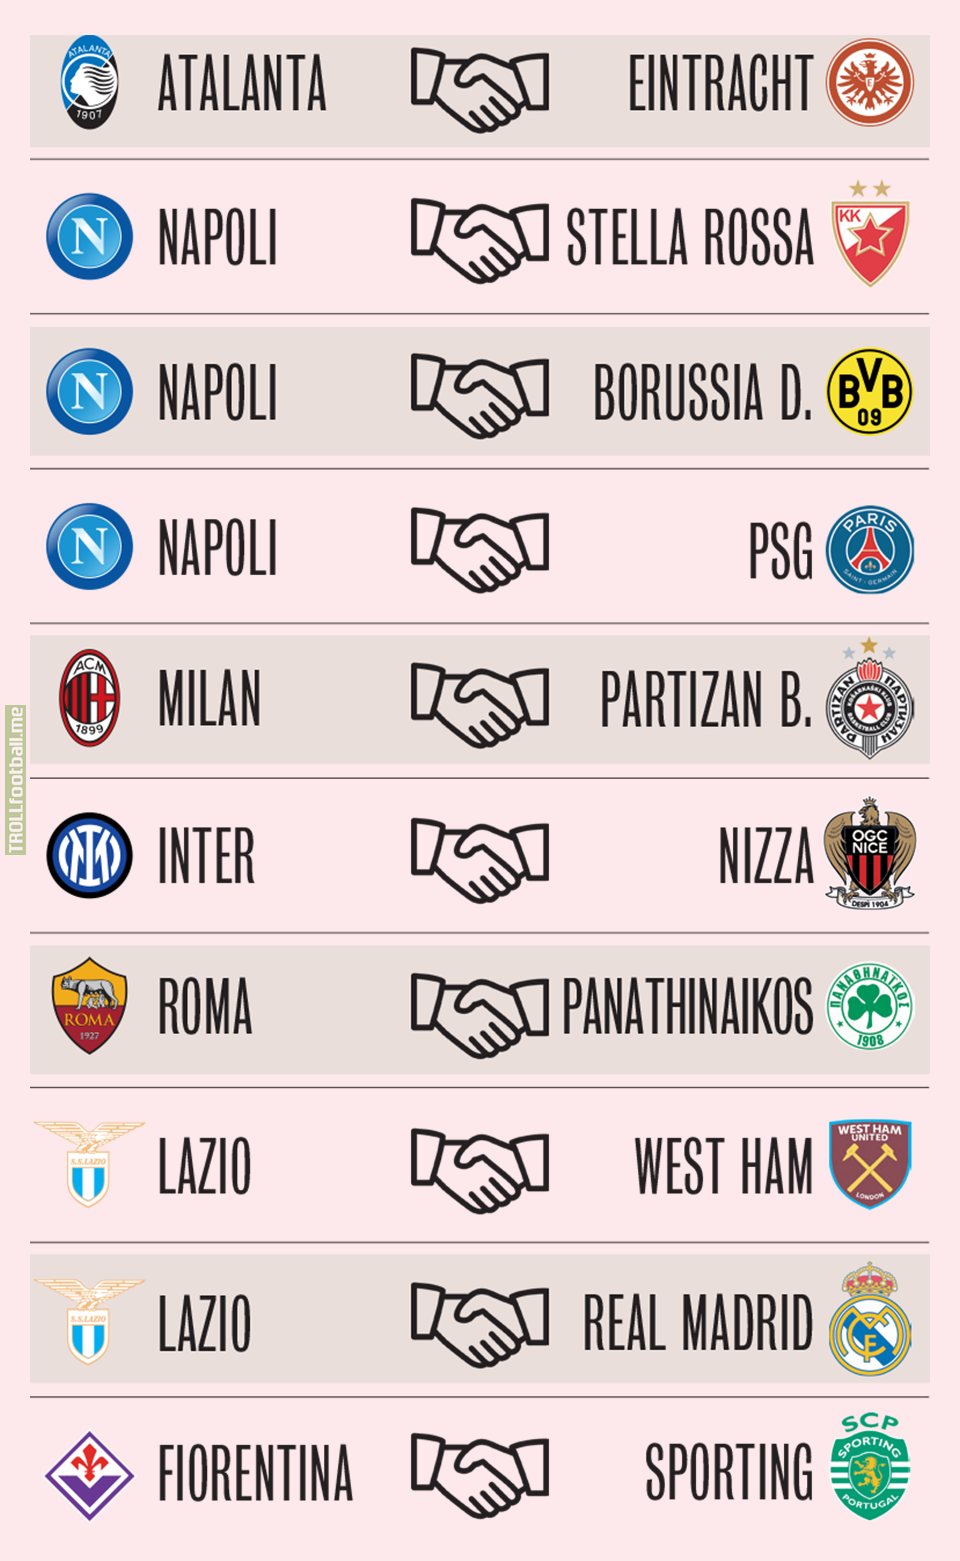 [gazzetta] Some international Ultras relationship of italian clubs behind the european matches at security risk